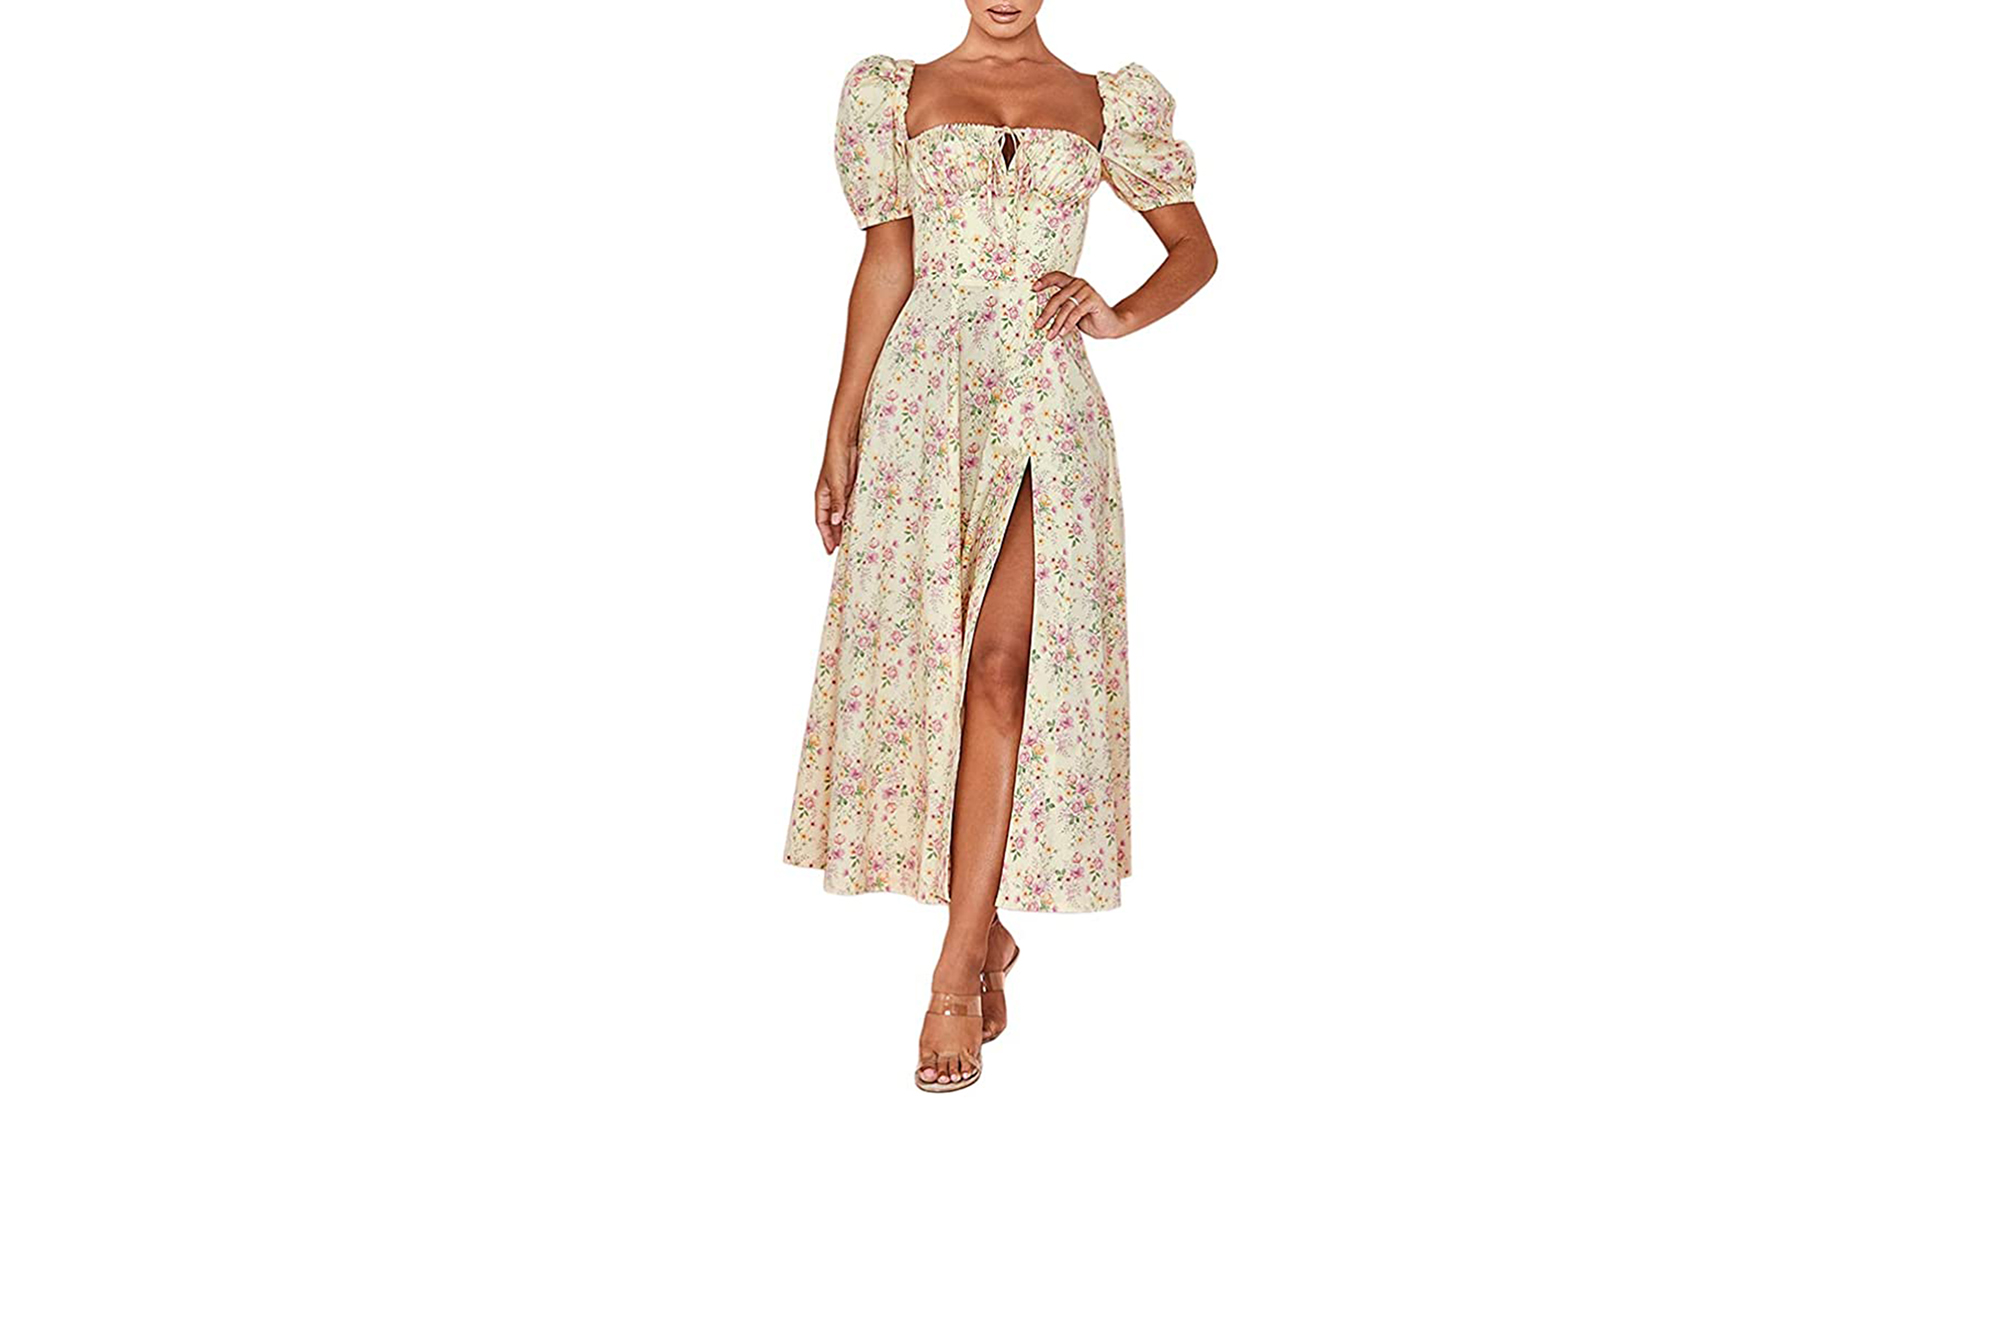 Amazon Floral Frock Is a Spring Style ...